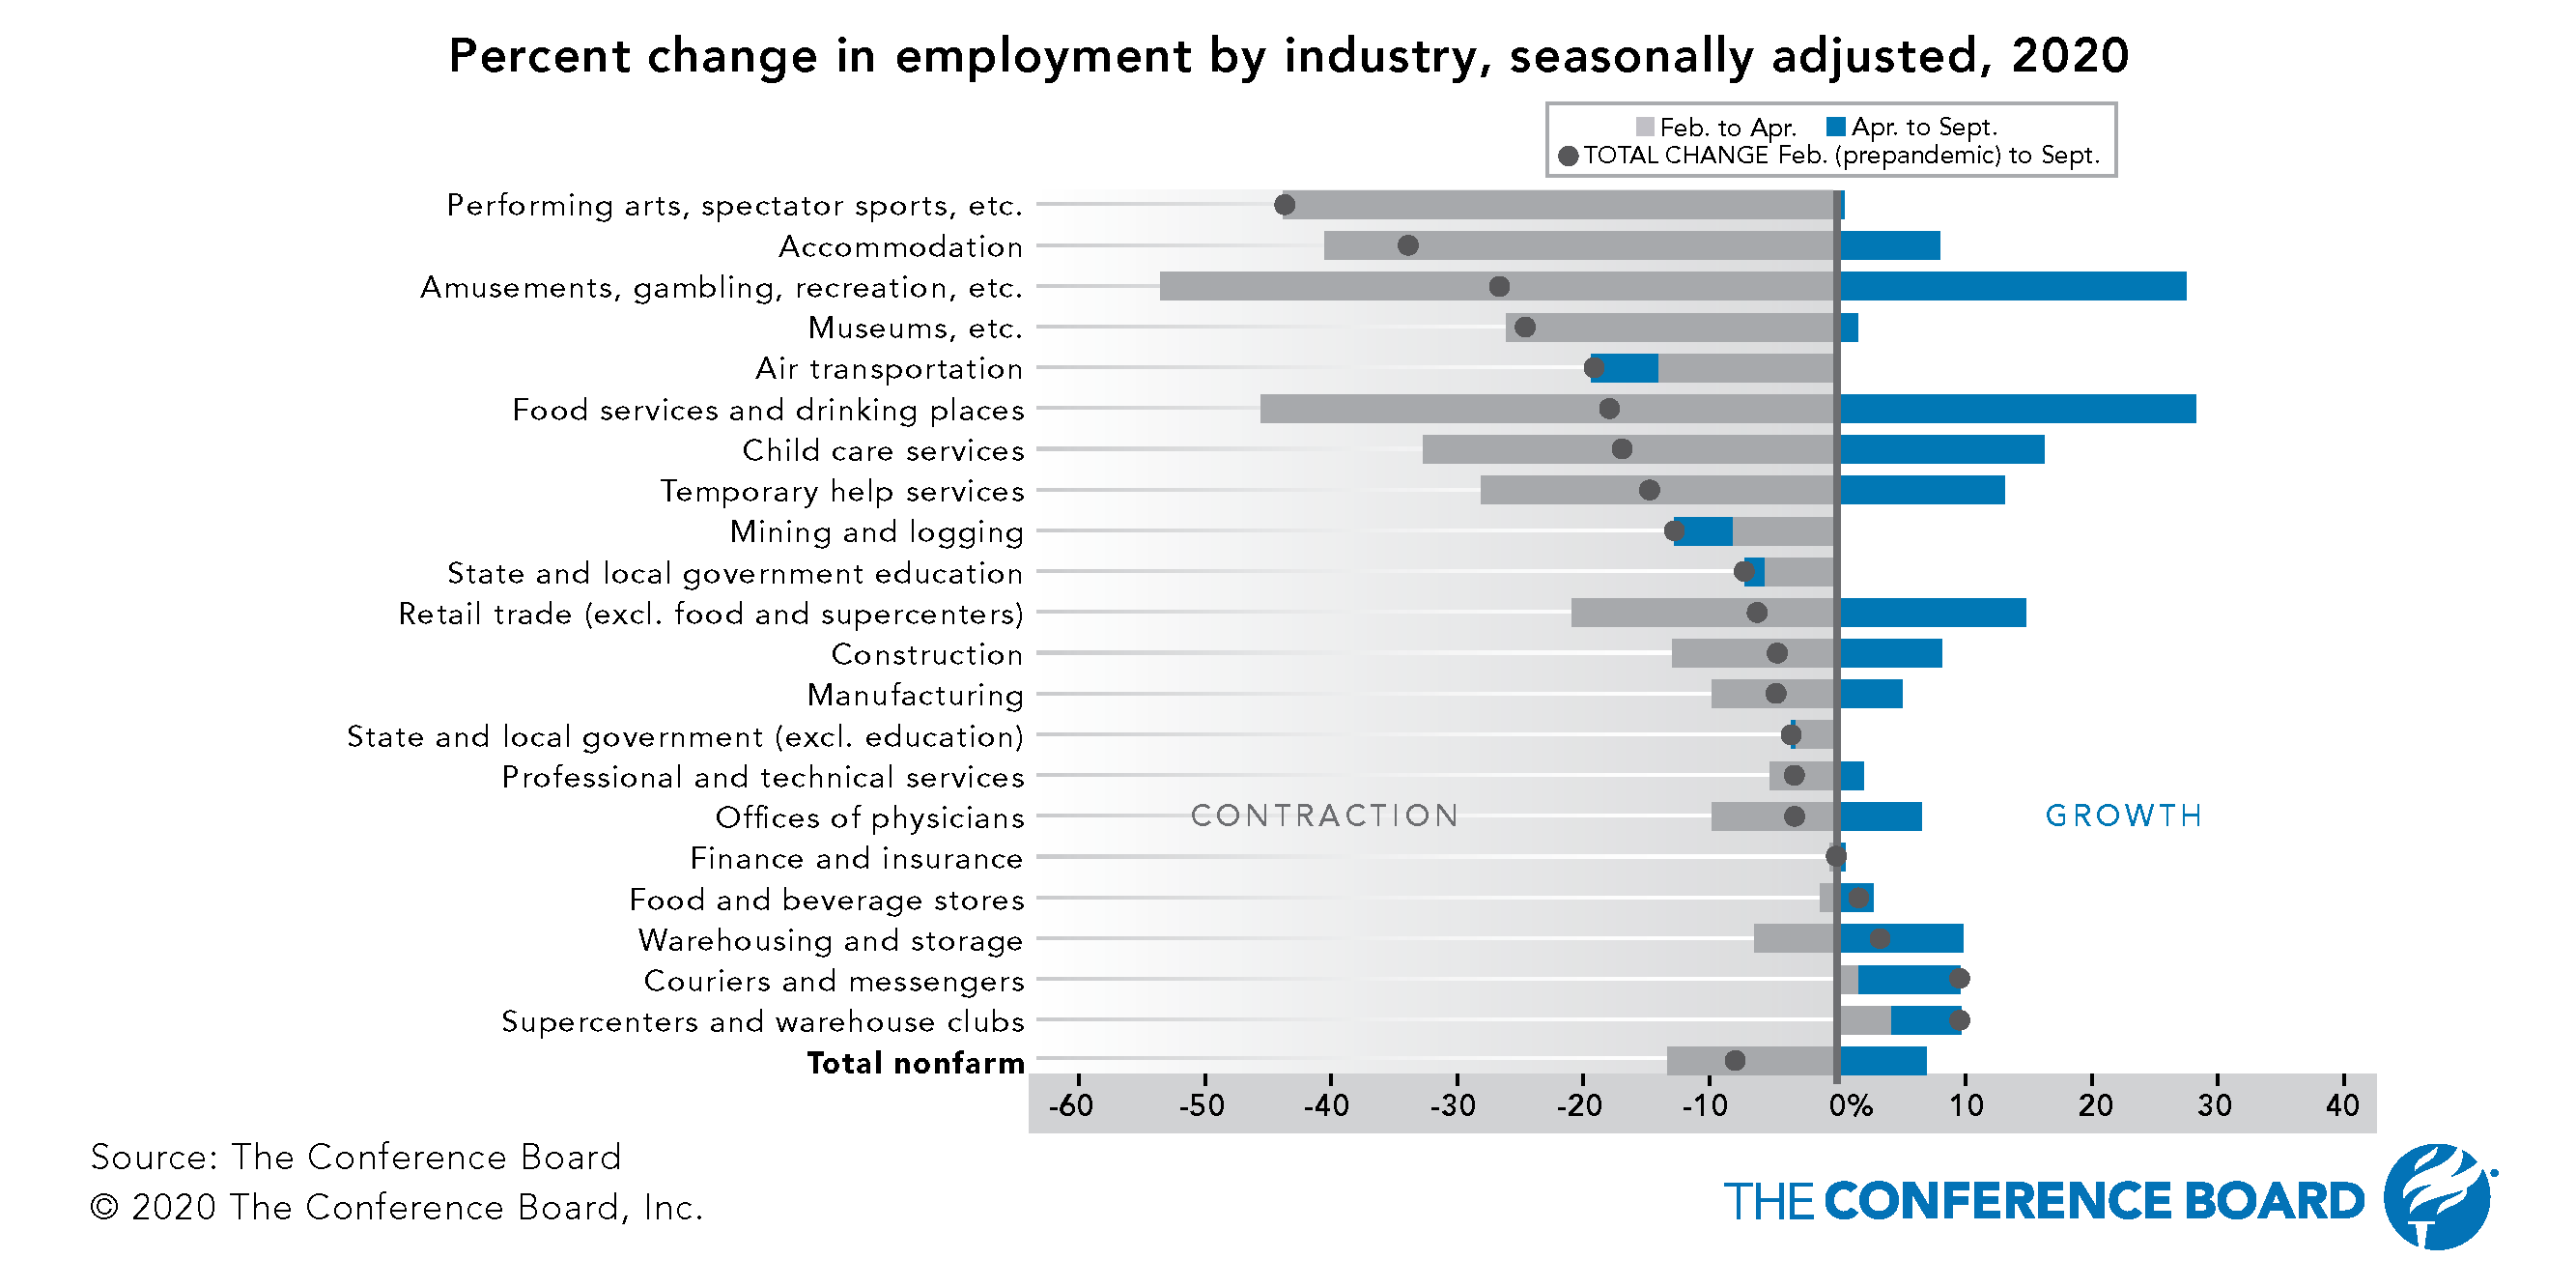 Job growth continues to slow, impact varies by sector